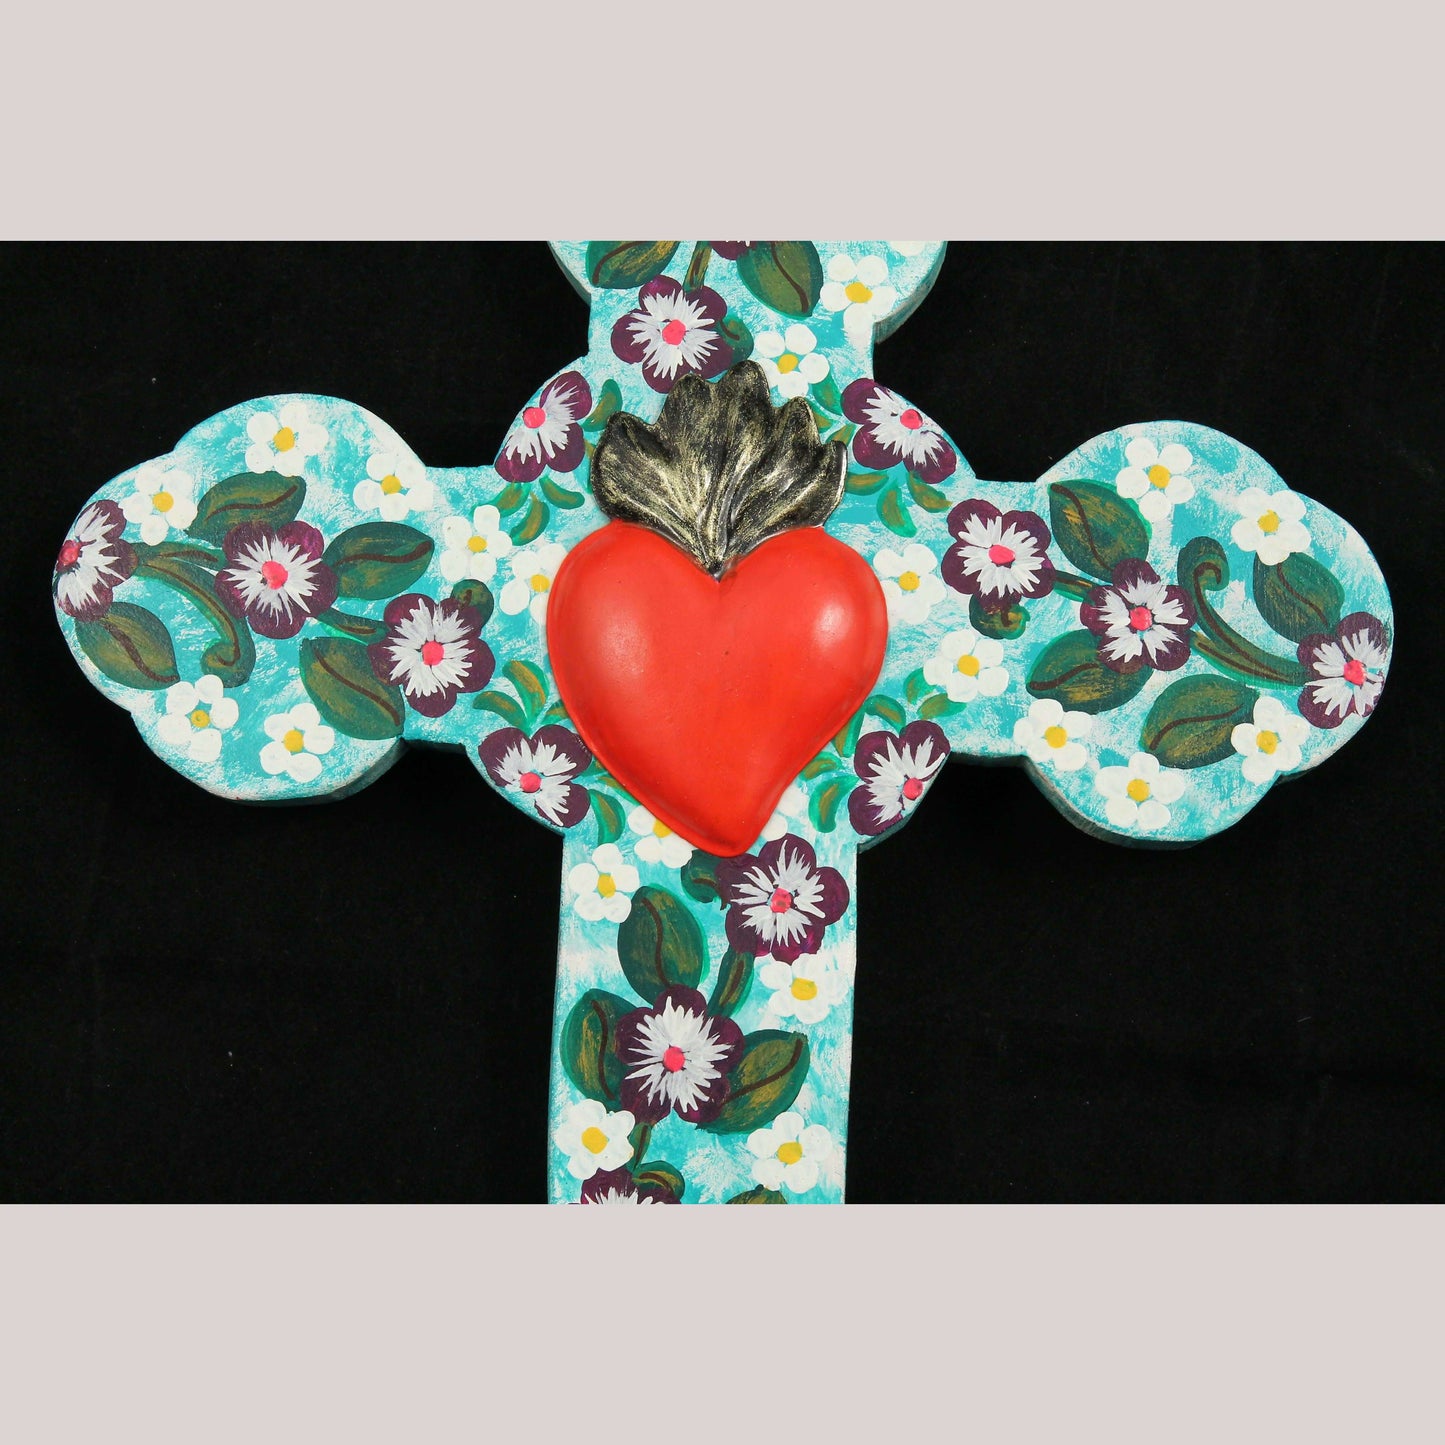 Lg Wood Hanging Cross/Milagro Mexican Folk Art Hand Made/Painted Flowers/Heart